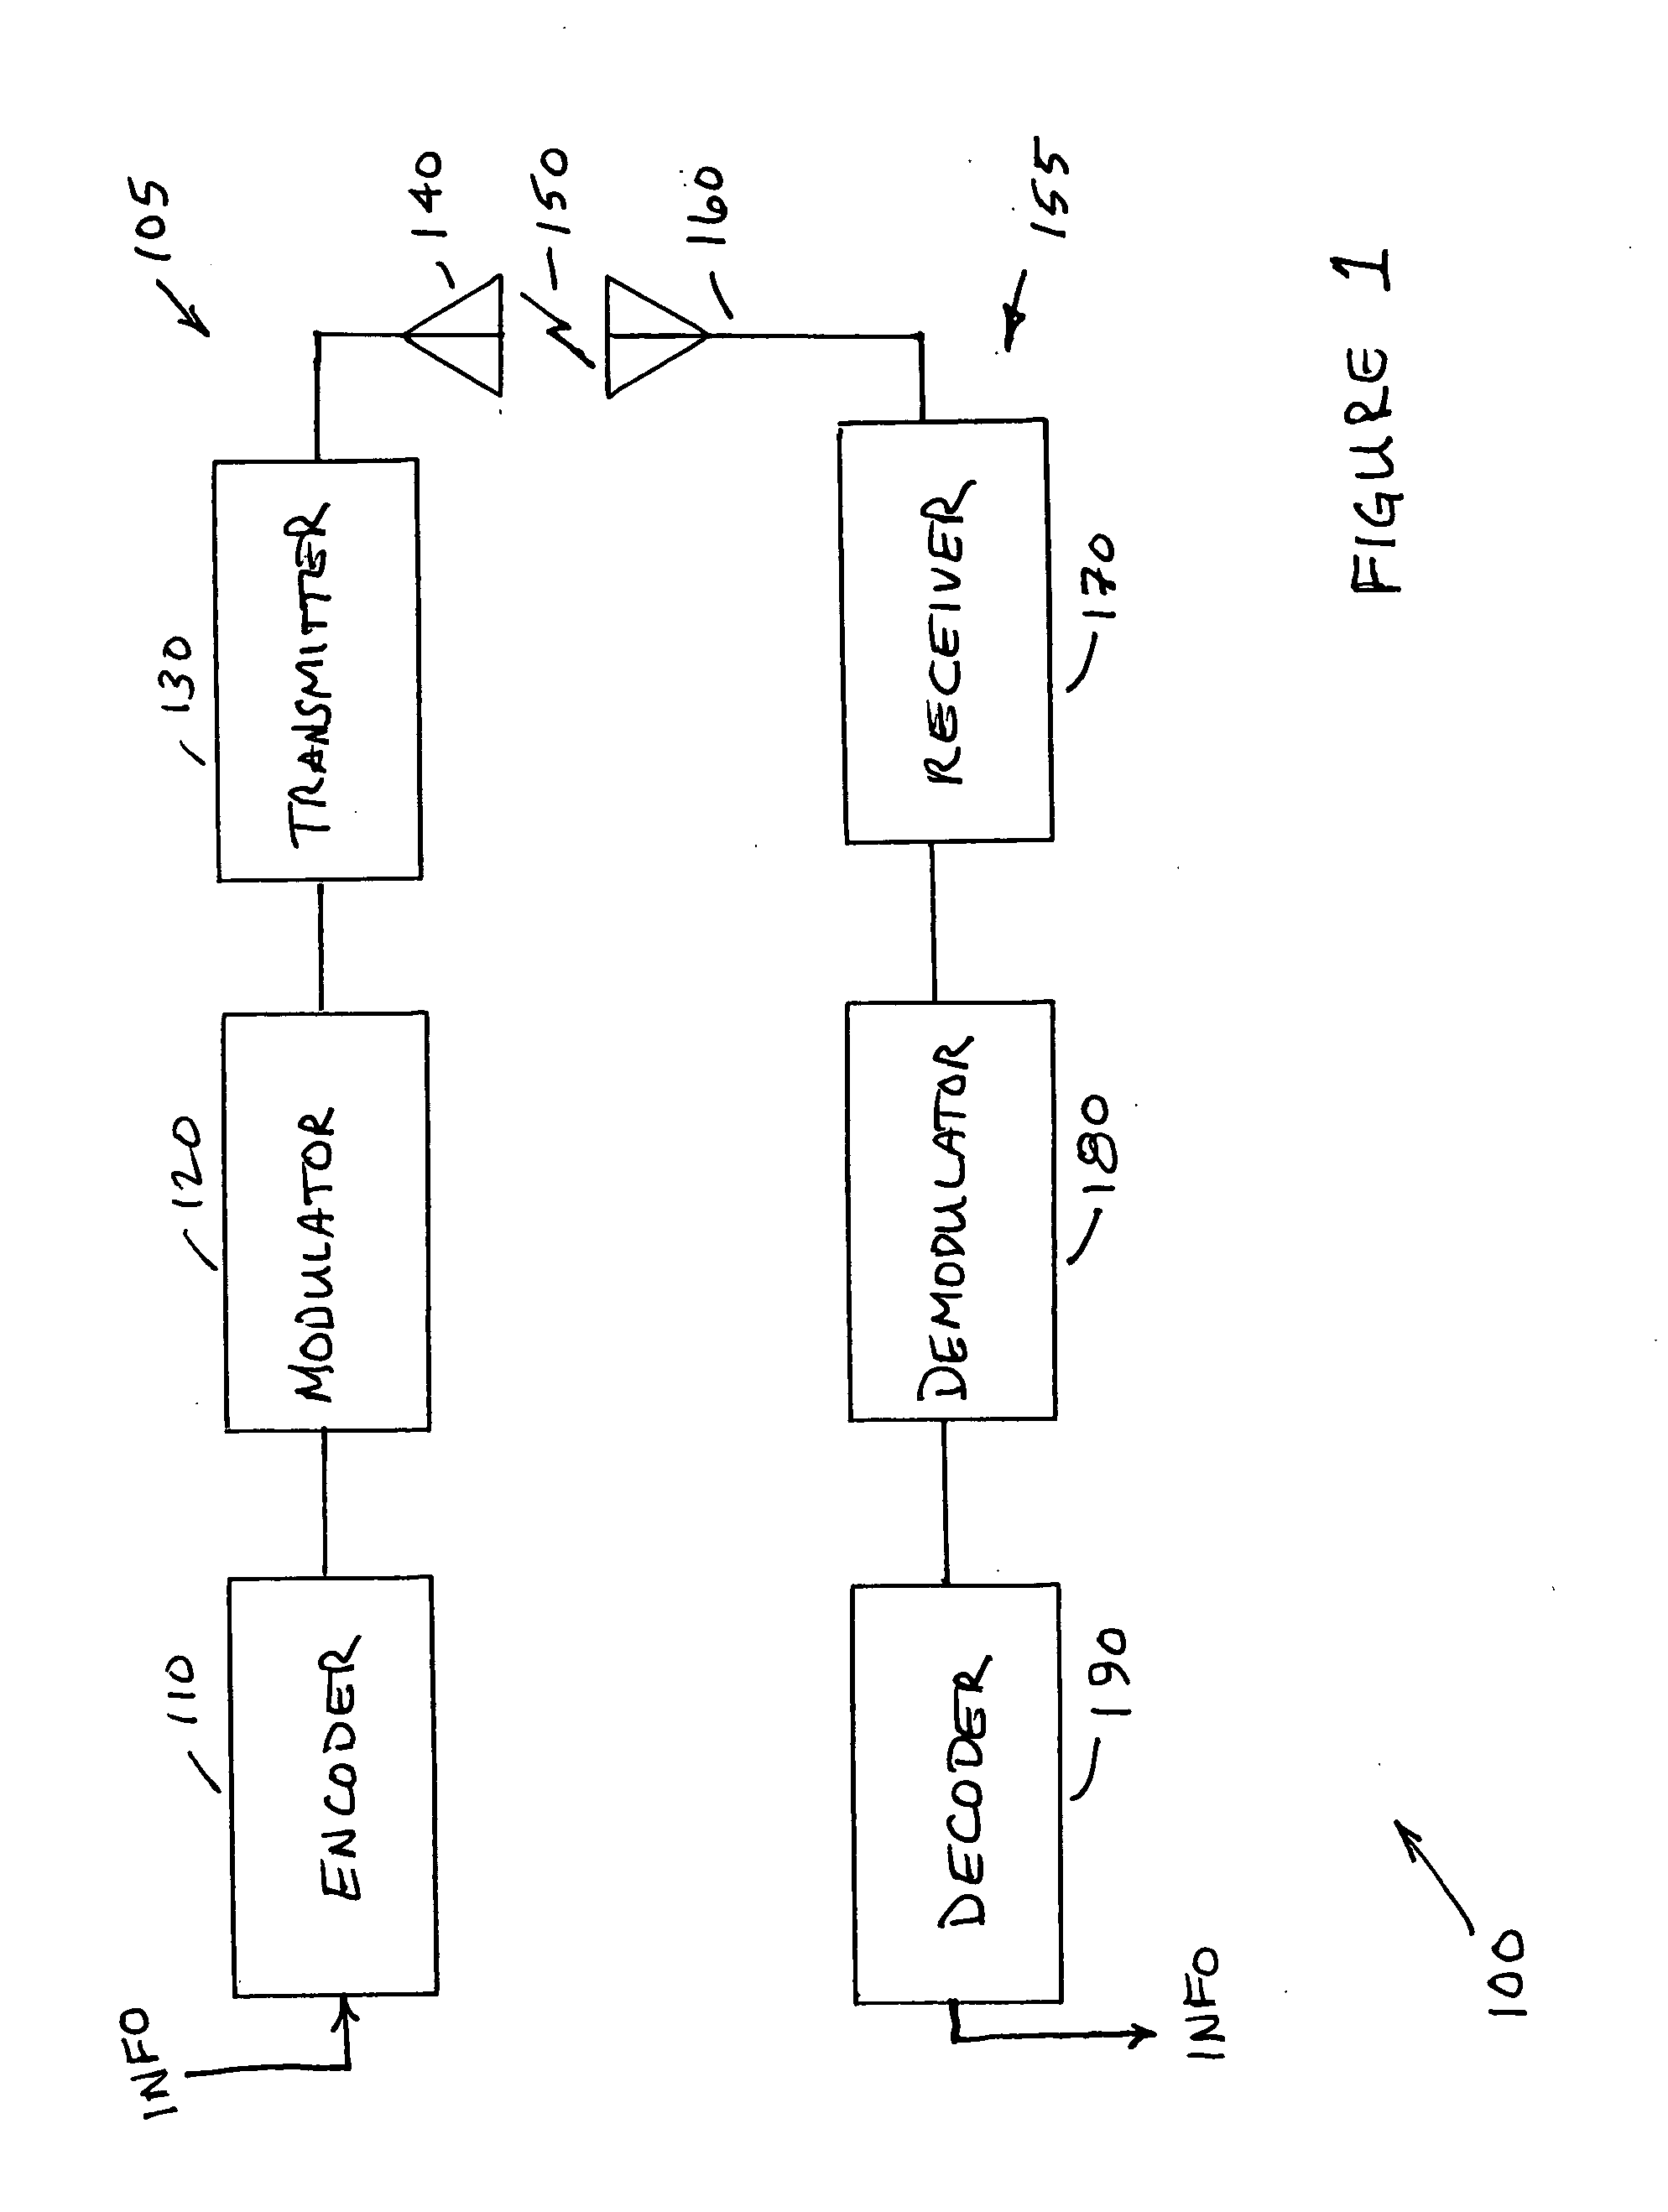 Method and apparatus for frequency synchronization in MIMO-OFDM wireless communication systems